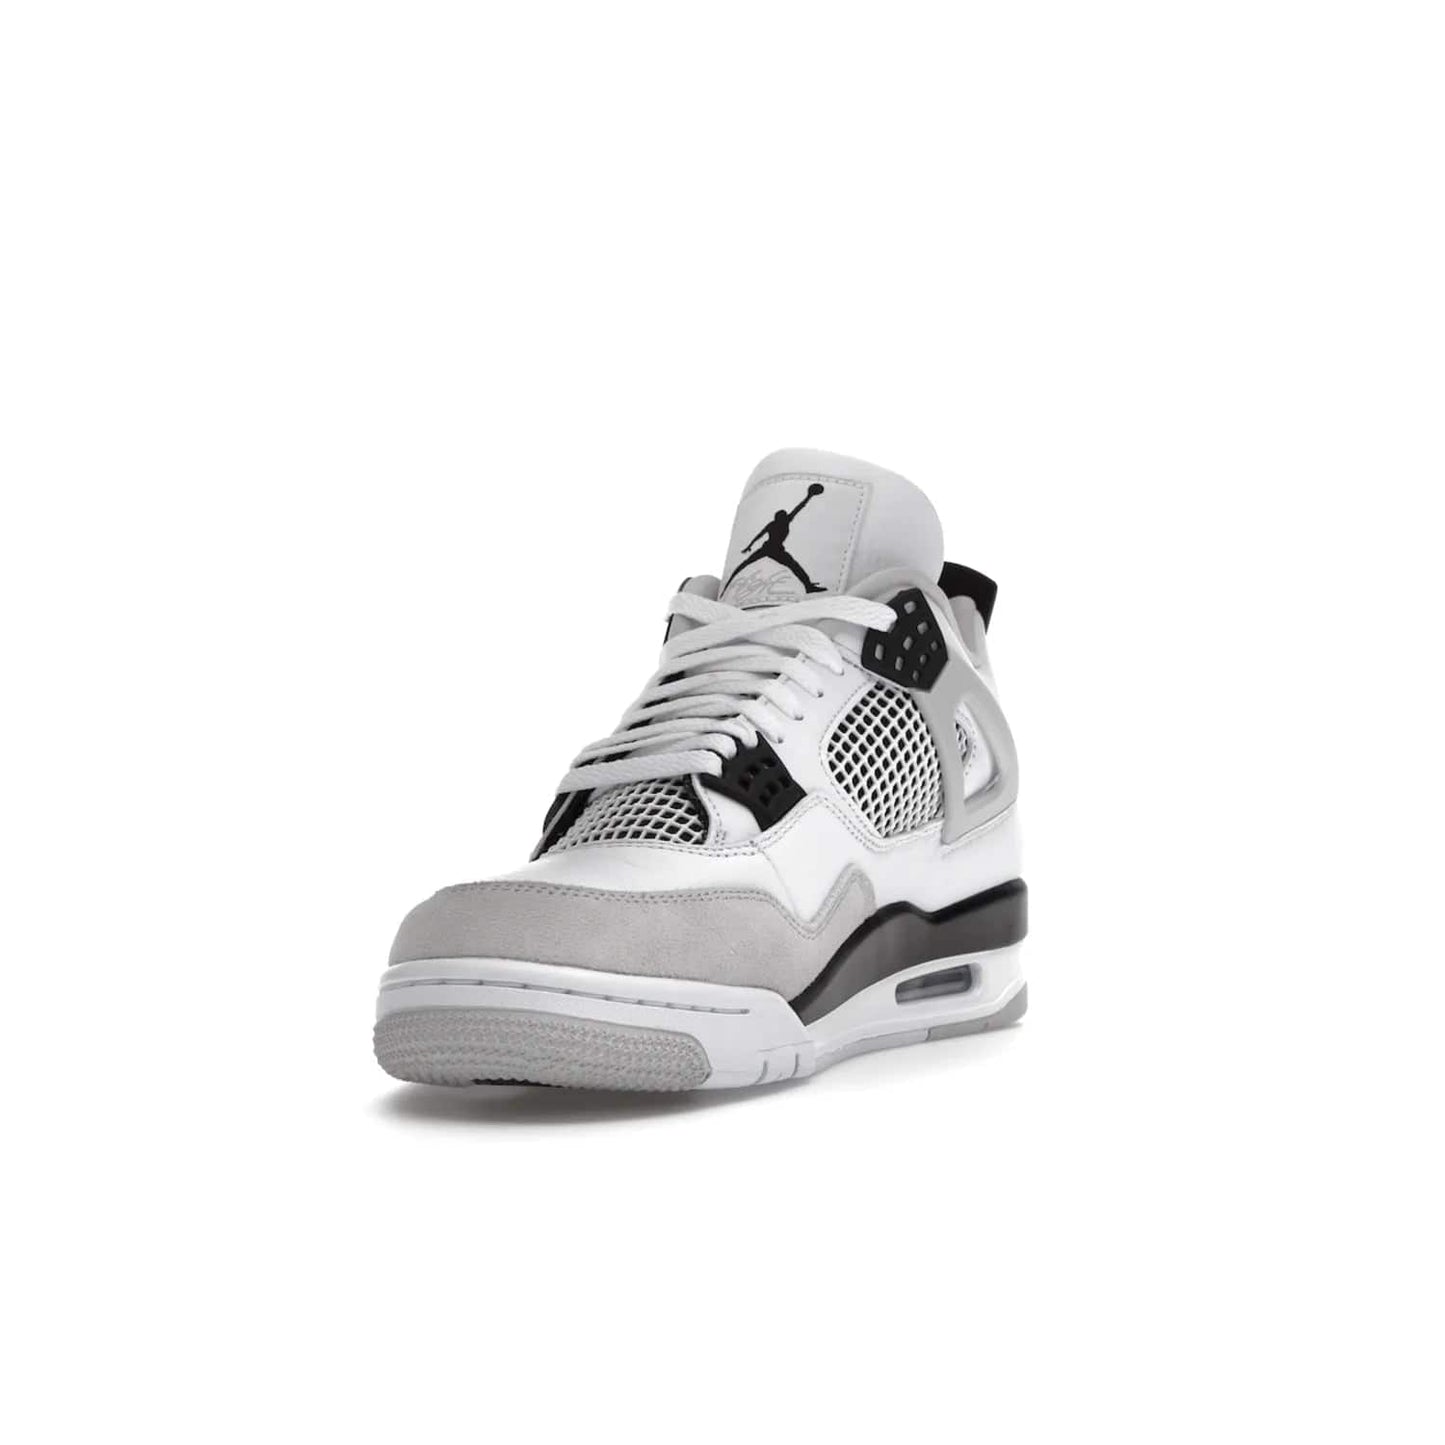 Jordan 4 Retro Military Black - Image 13 - Only at www.BallersClubKickz.com - Updated Air Jordan 4 style with a white/black/light grey sole and visible Air unit. Released in May 2022, offering timeless classic style and comfort.